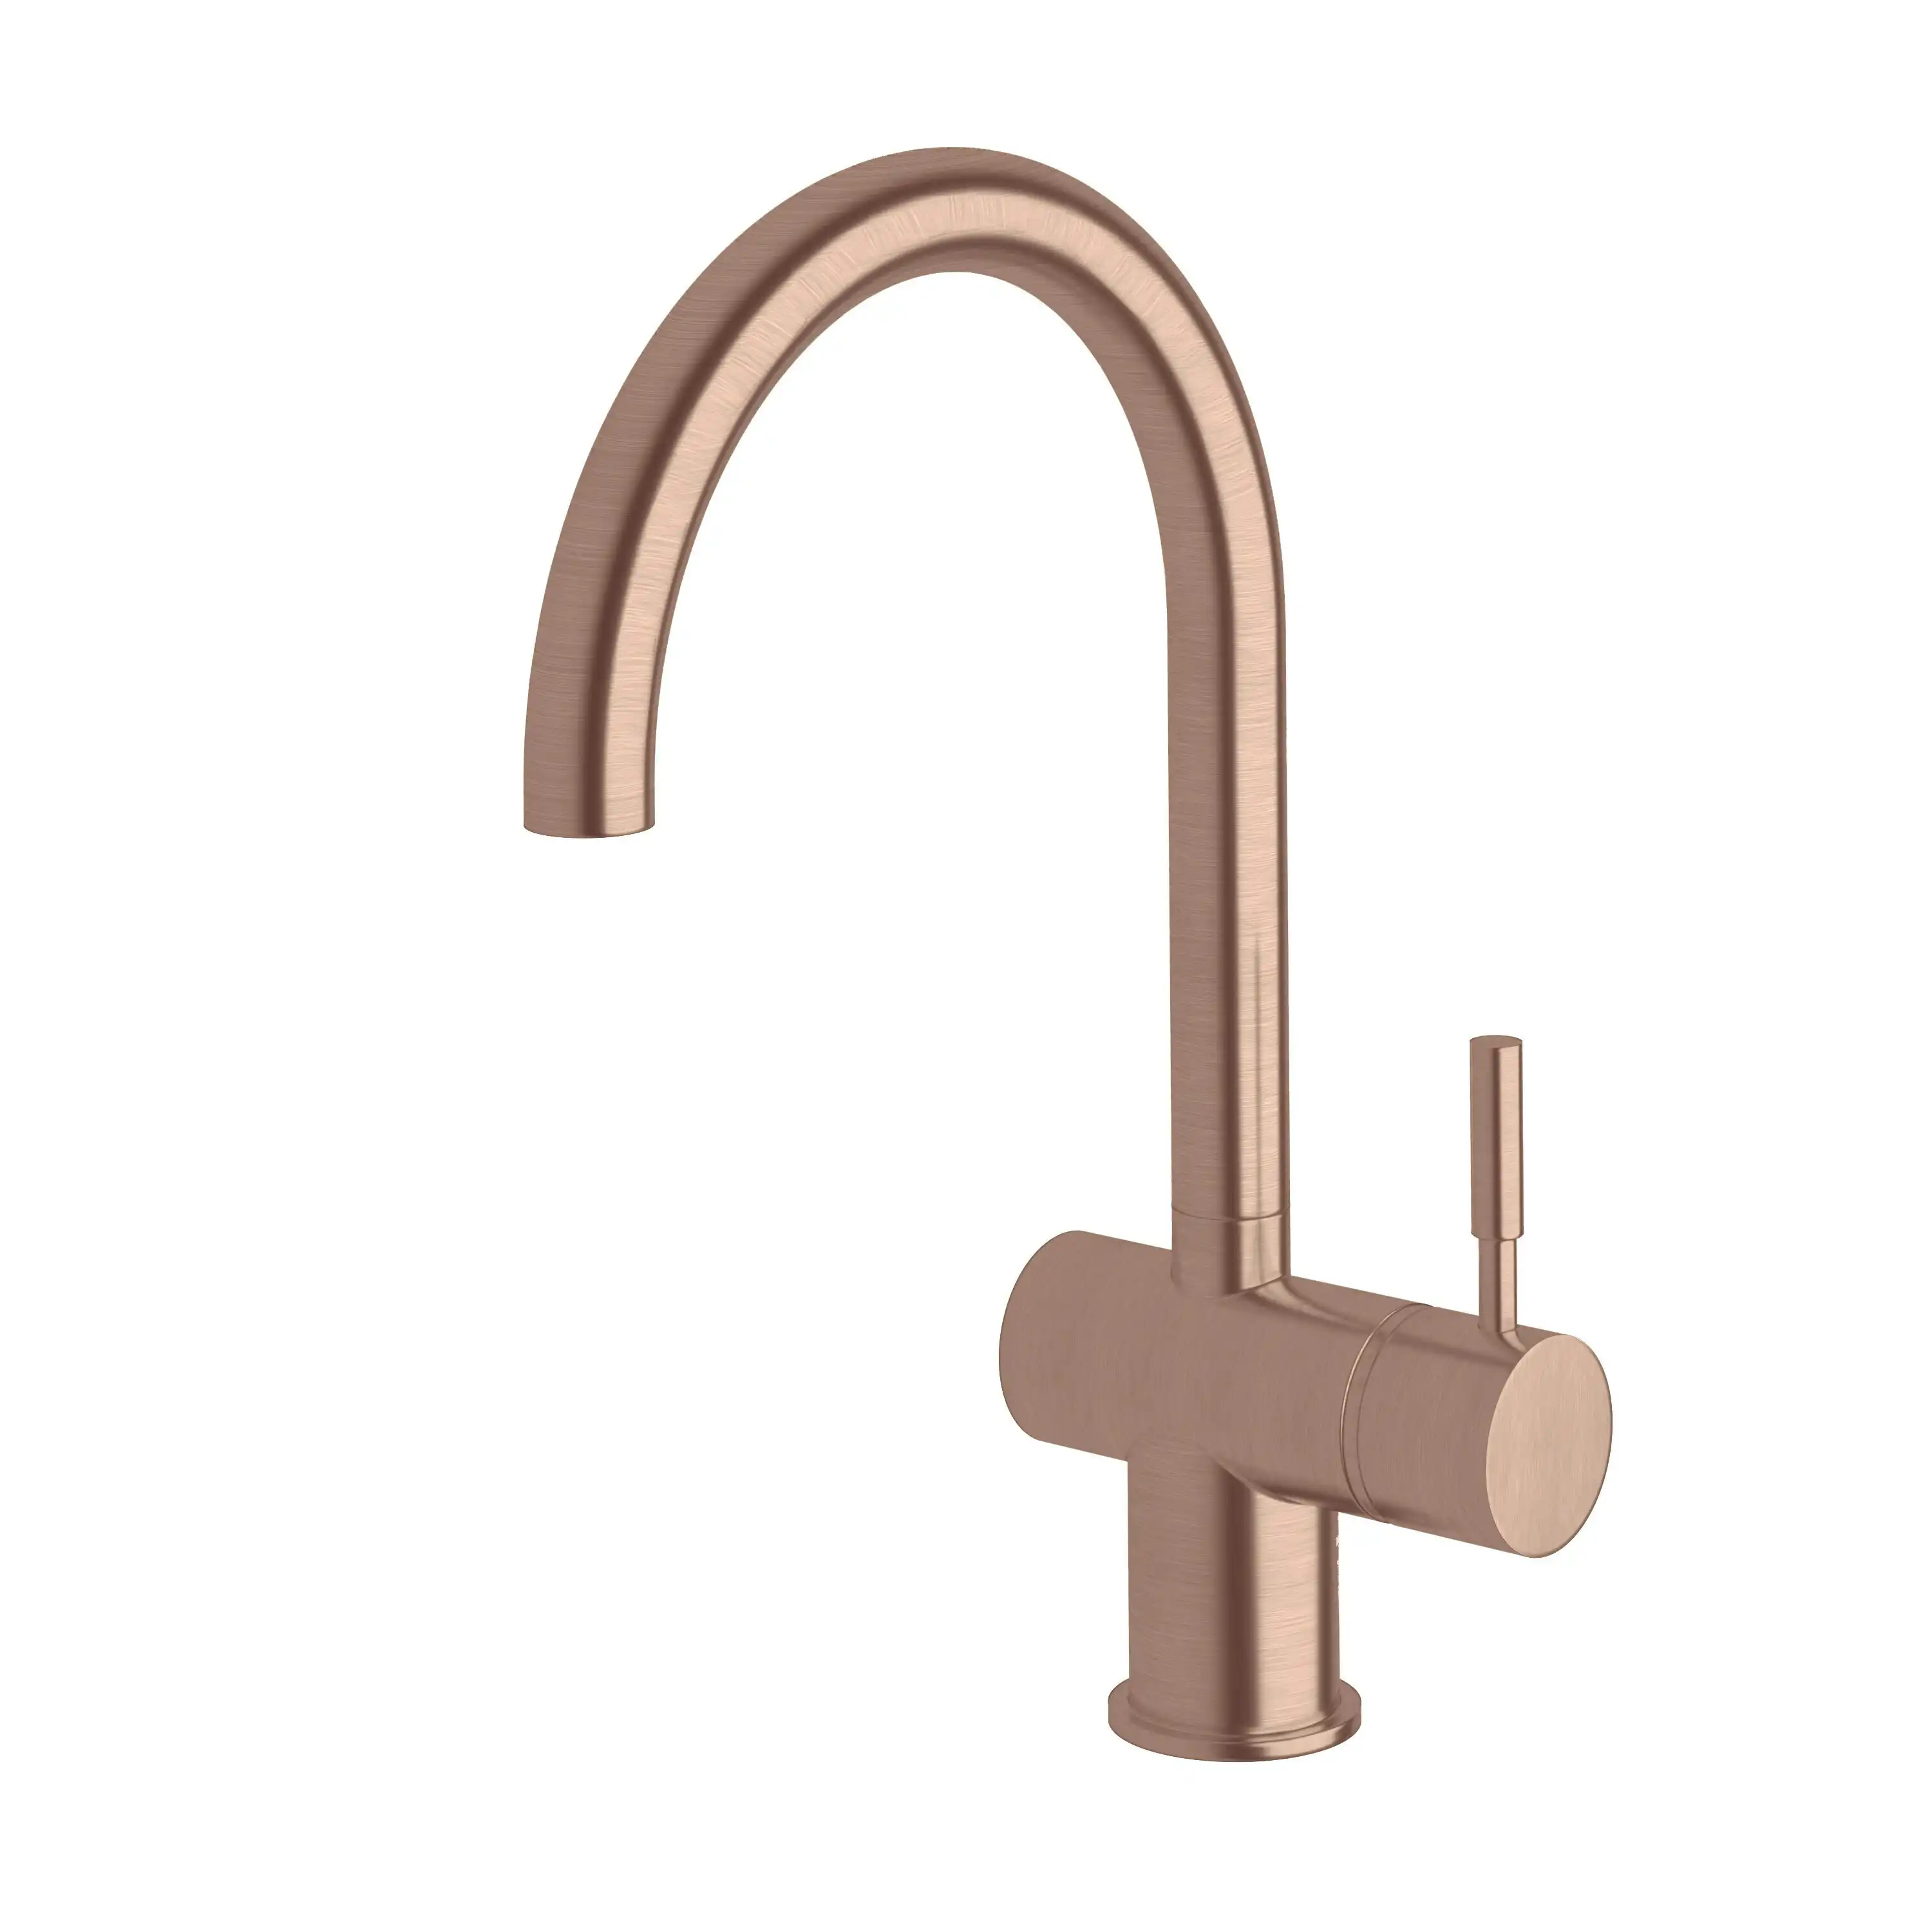 Sussex Taps Voda Sink Mixer Curved Brushed Rose Gold